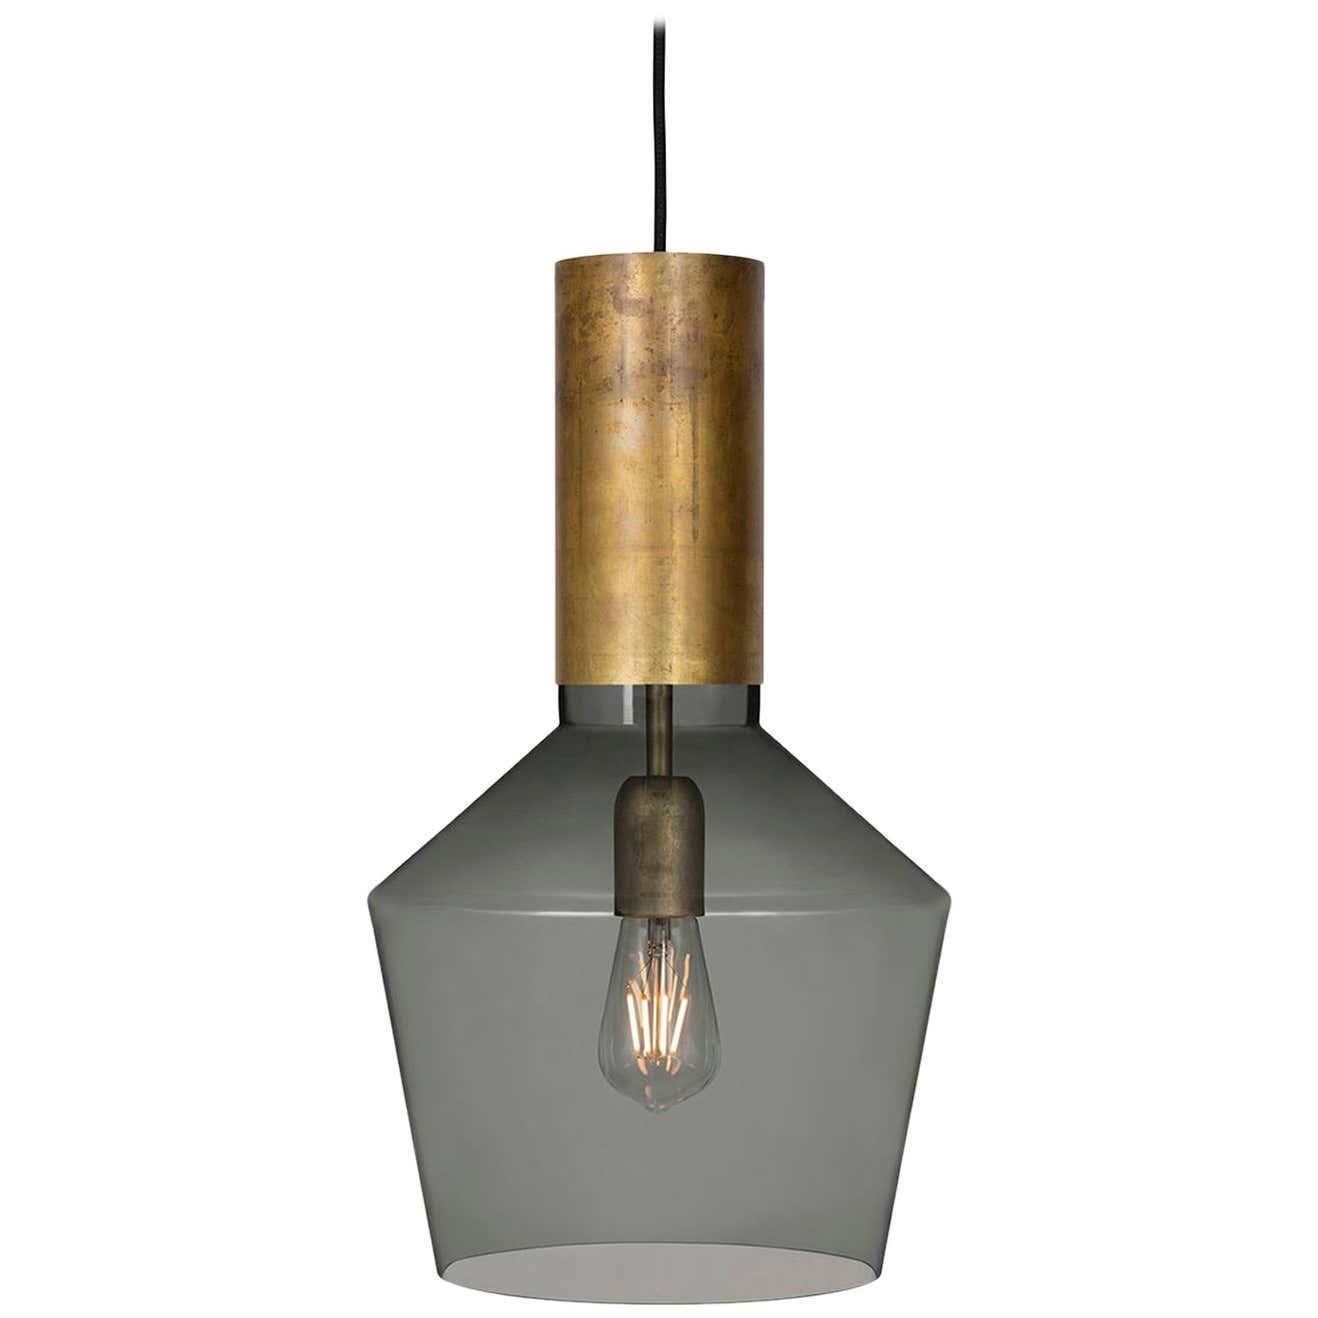 Contemporary Sabina Grubbeson Fenomen With Smoked Glass Ceiling Lamp by Konsthantverk For Sale